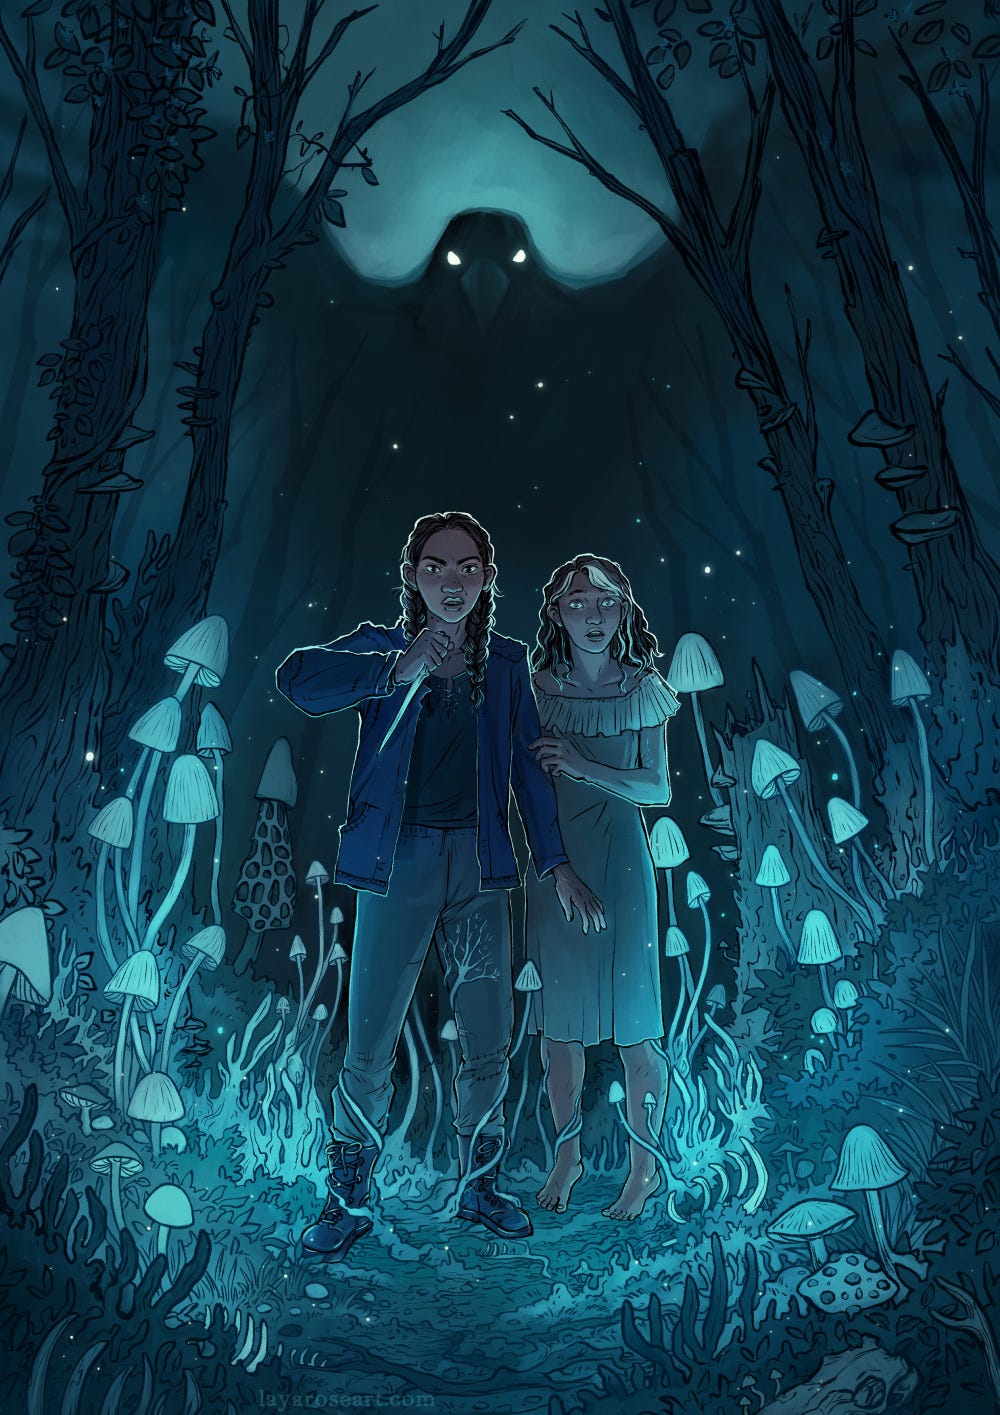 illustration of two girls in a spooky forest, surrounded by glowing mushrooms and moss and animal bones. The girl on the left is taller, with brown skin and braids, and is holding up a bone knife and protecting the other girl, in a thin dress with blank eyes and a white streak in her hair. Behind the tree trunks behind them is the silhouette of a large raven with its wings outstretched, blending into the sky, with glowing eyes.